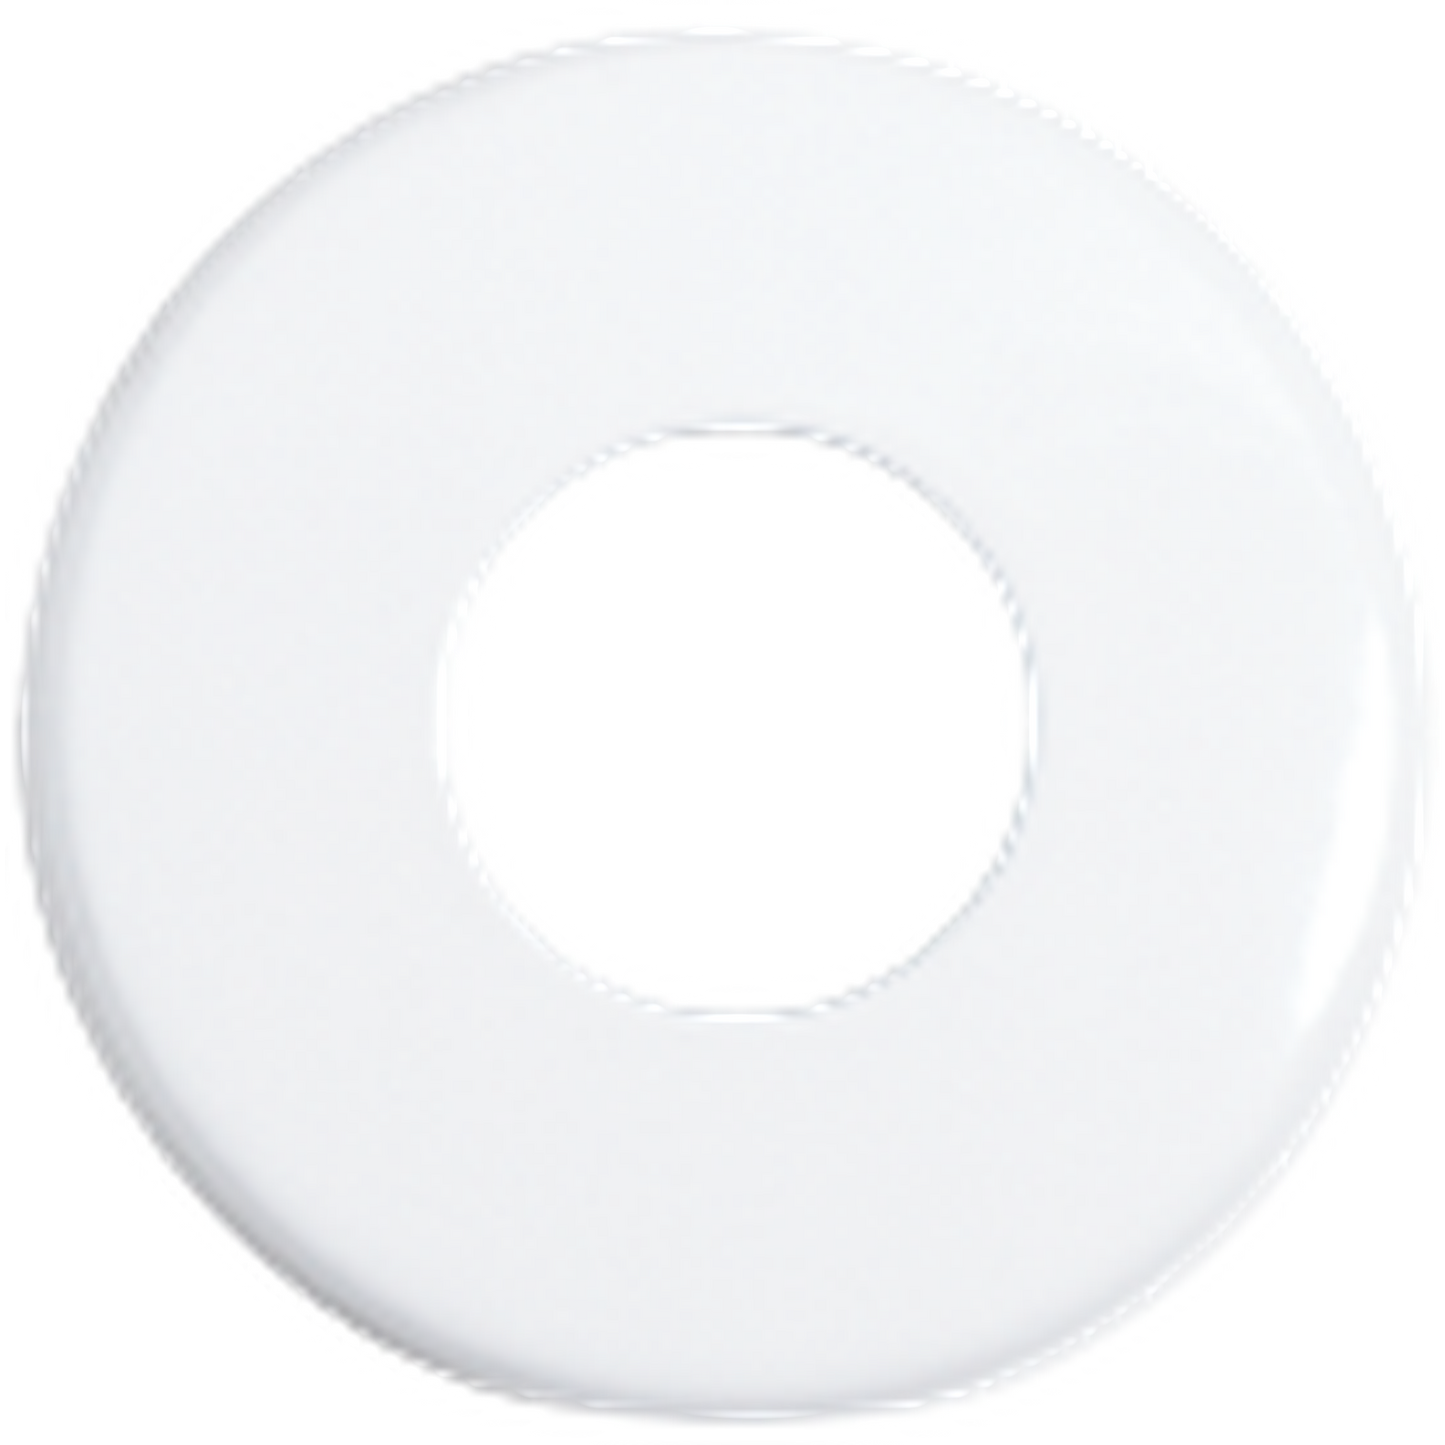 Seachrome Conorado Series 6" White Wrinkle Powder Coat Concealed Mounting Flange Towel Ring